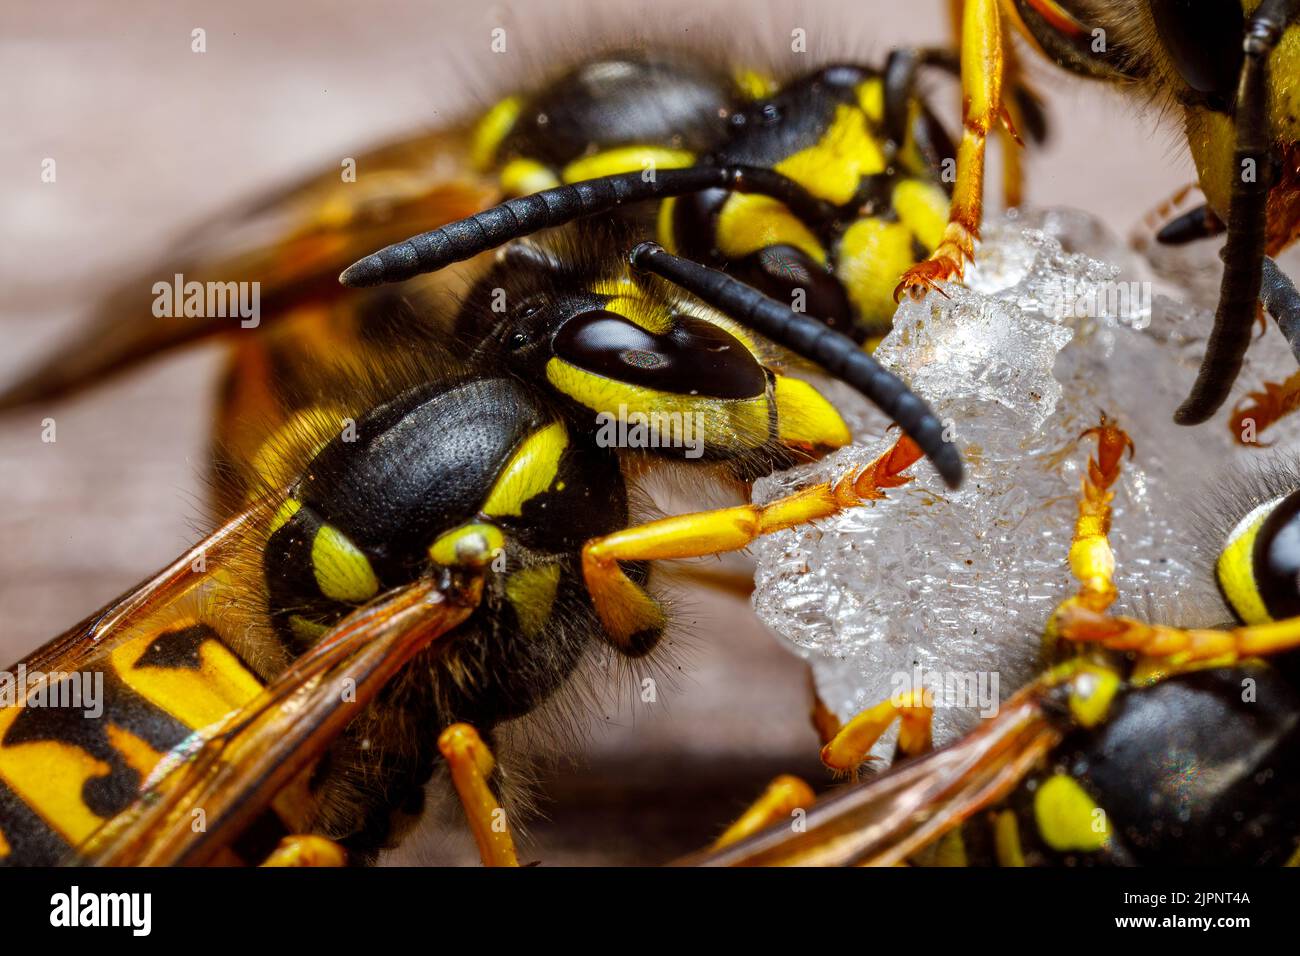 A dangerous Wasp on food Stock Photo